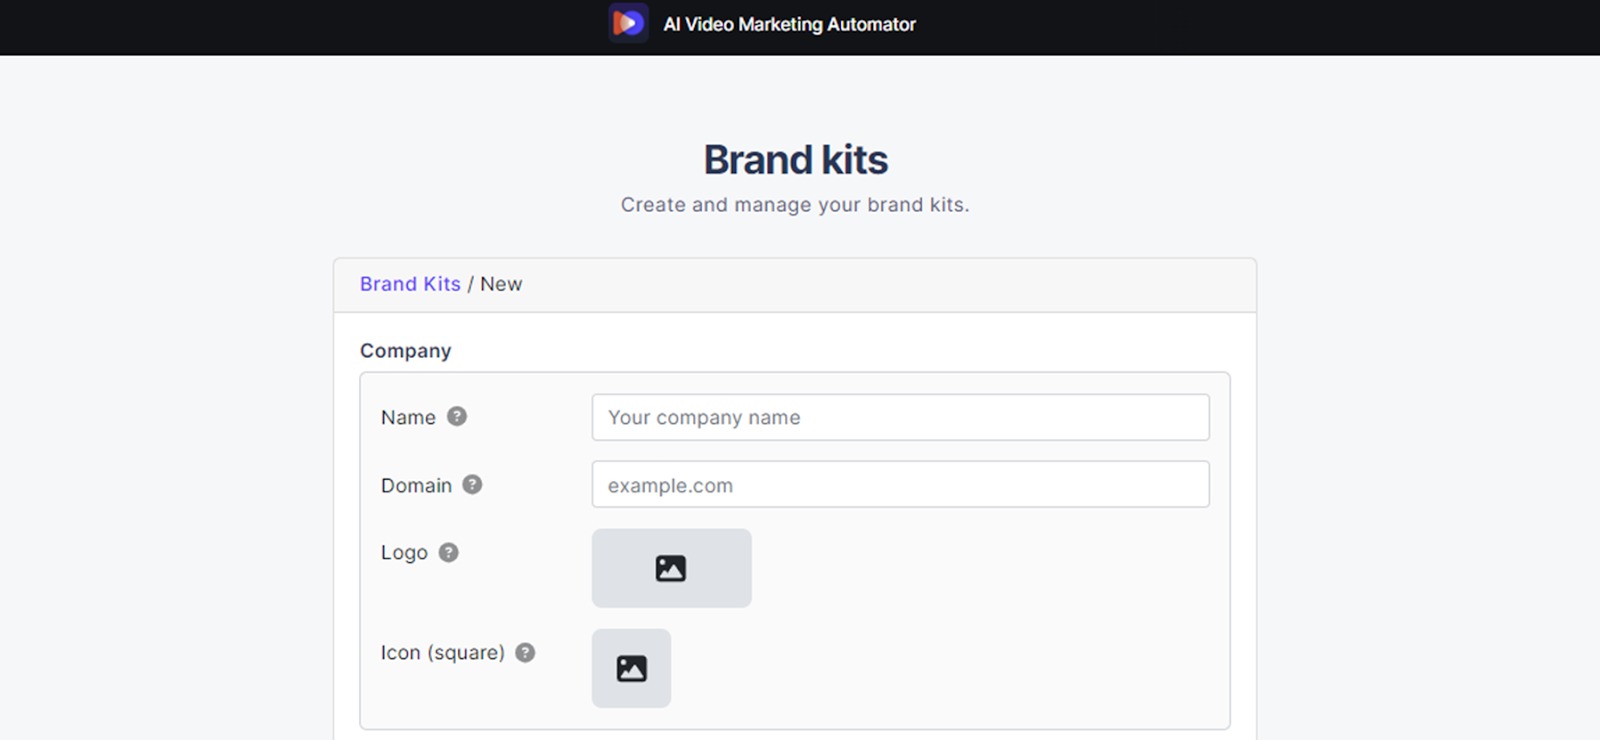 Creating and managing your brand kits in AI Video Marketing Automator.